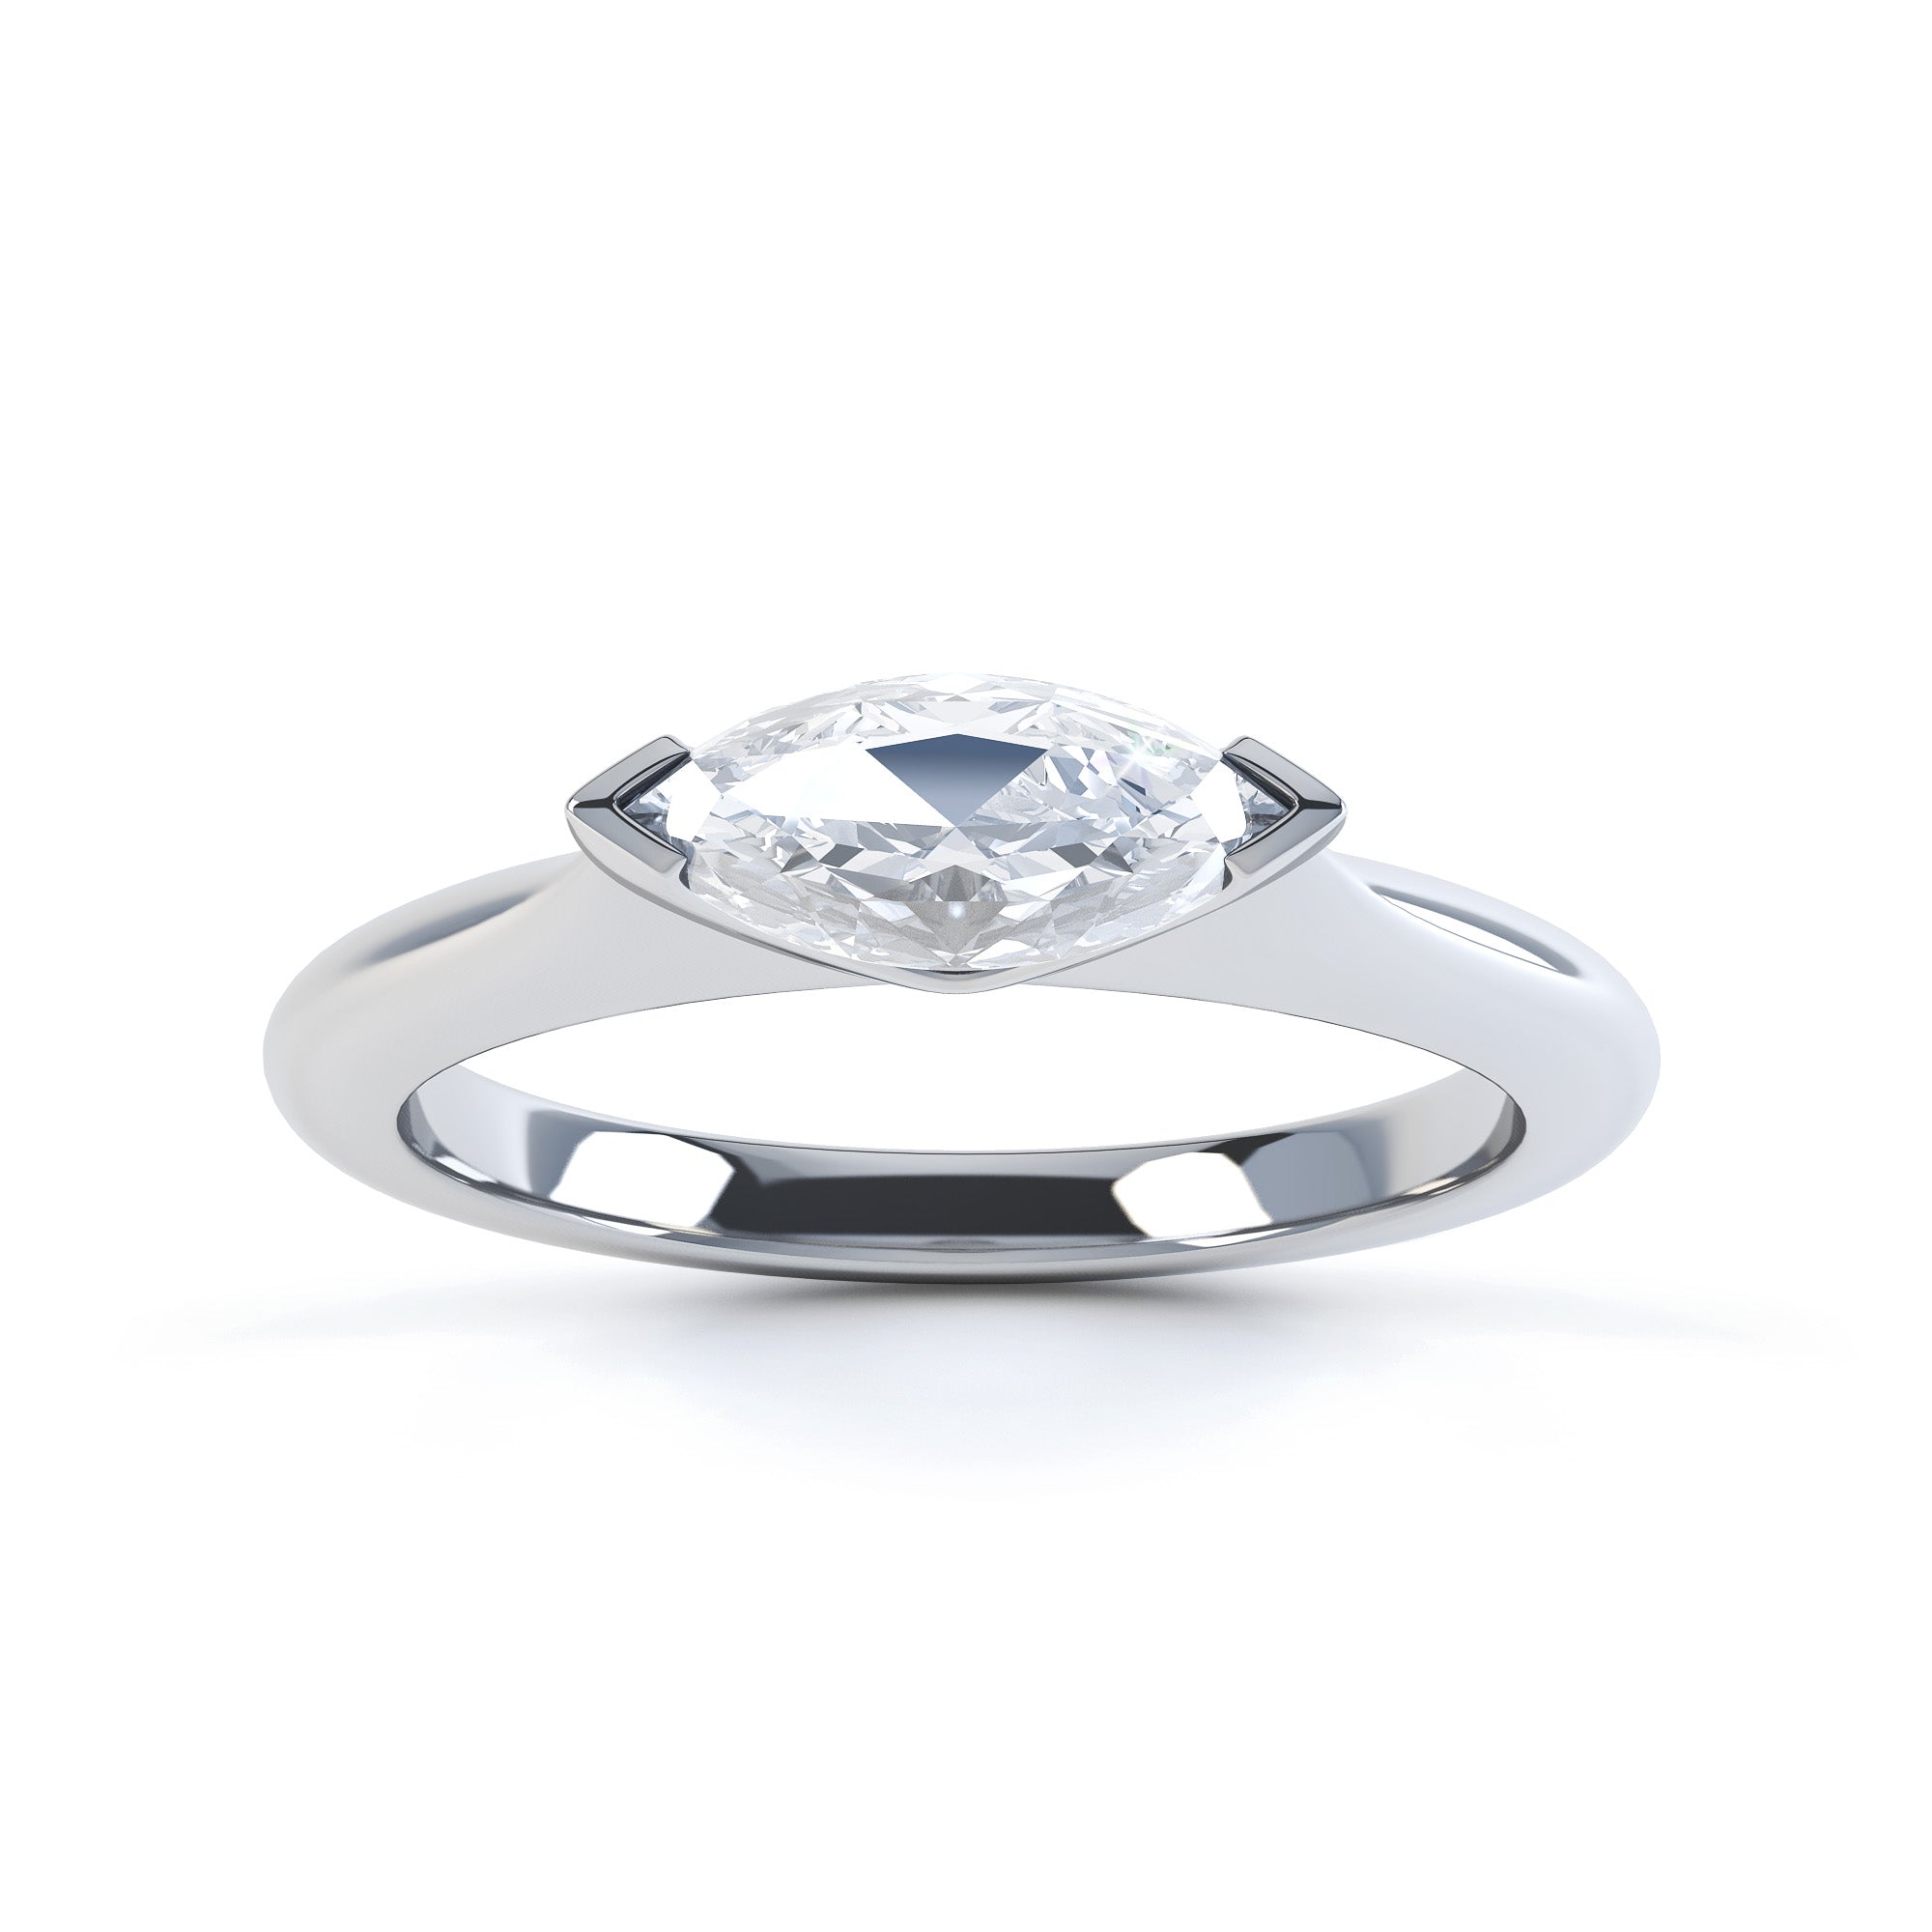 Marquise Cut Centre Stone, V claw, Diamond Engagement Ring with Knife Edge shoulders